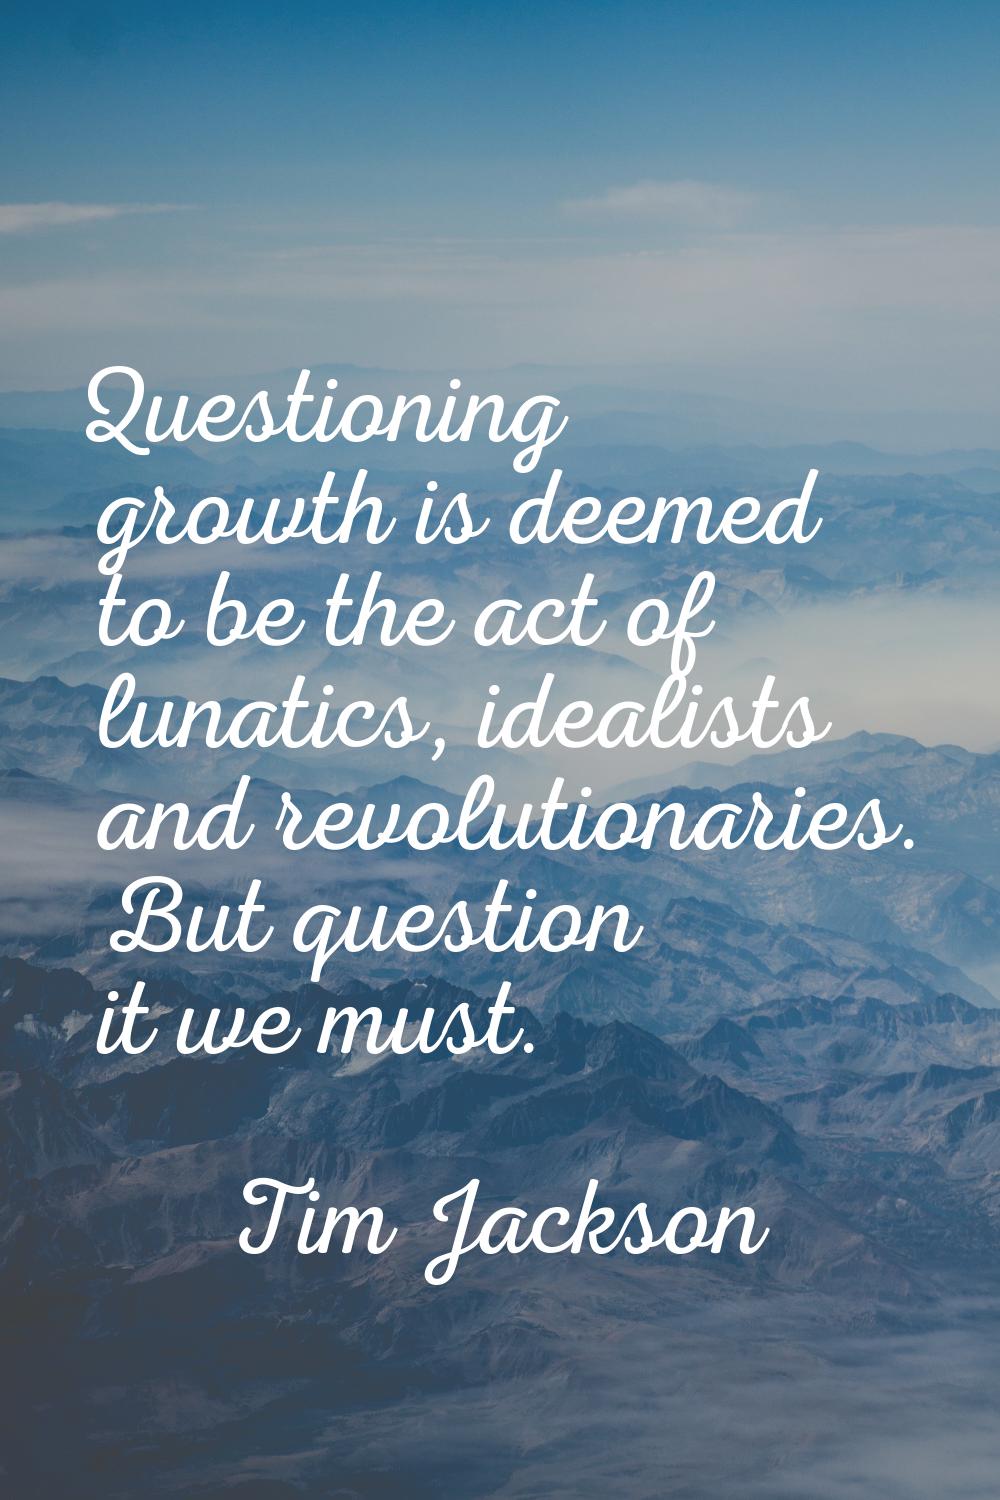 Questioning growth is deemed to be the act of lunatics, idealists and revolutionaries. But question